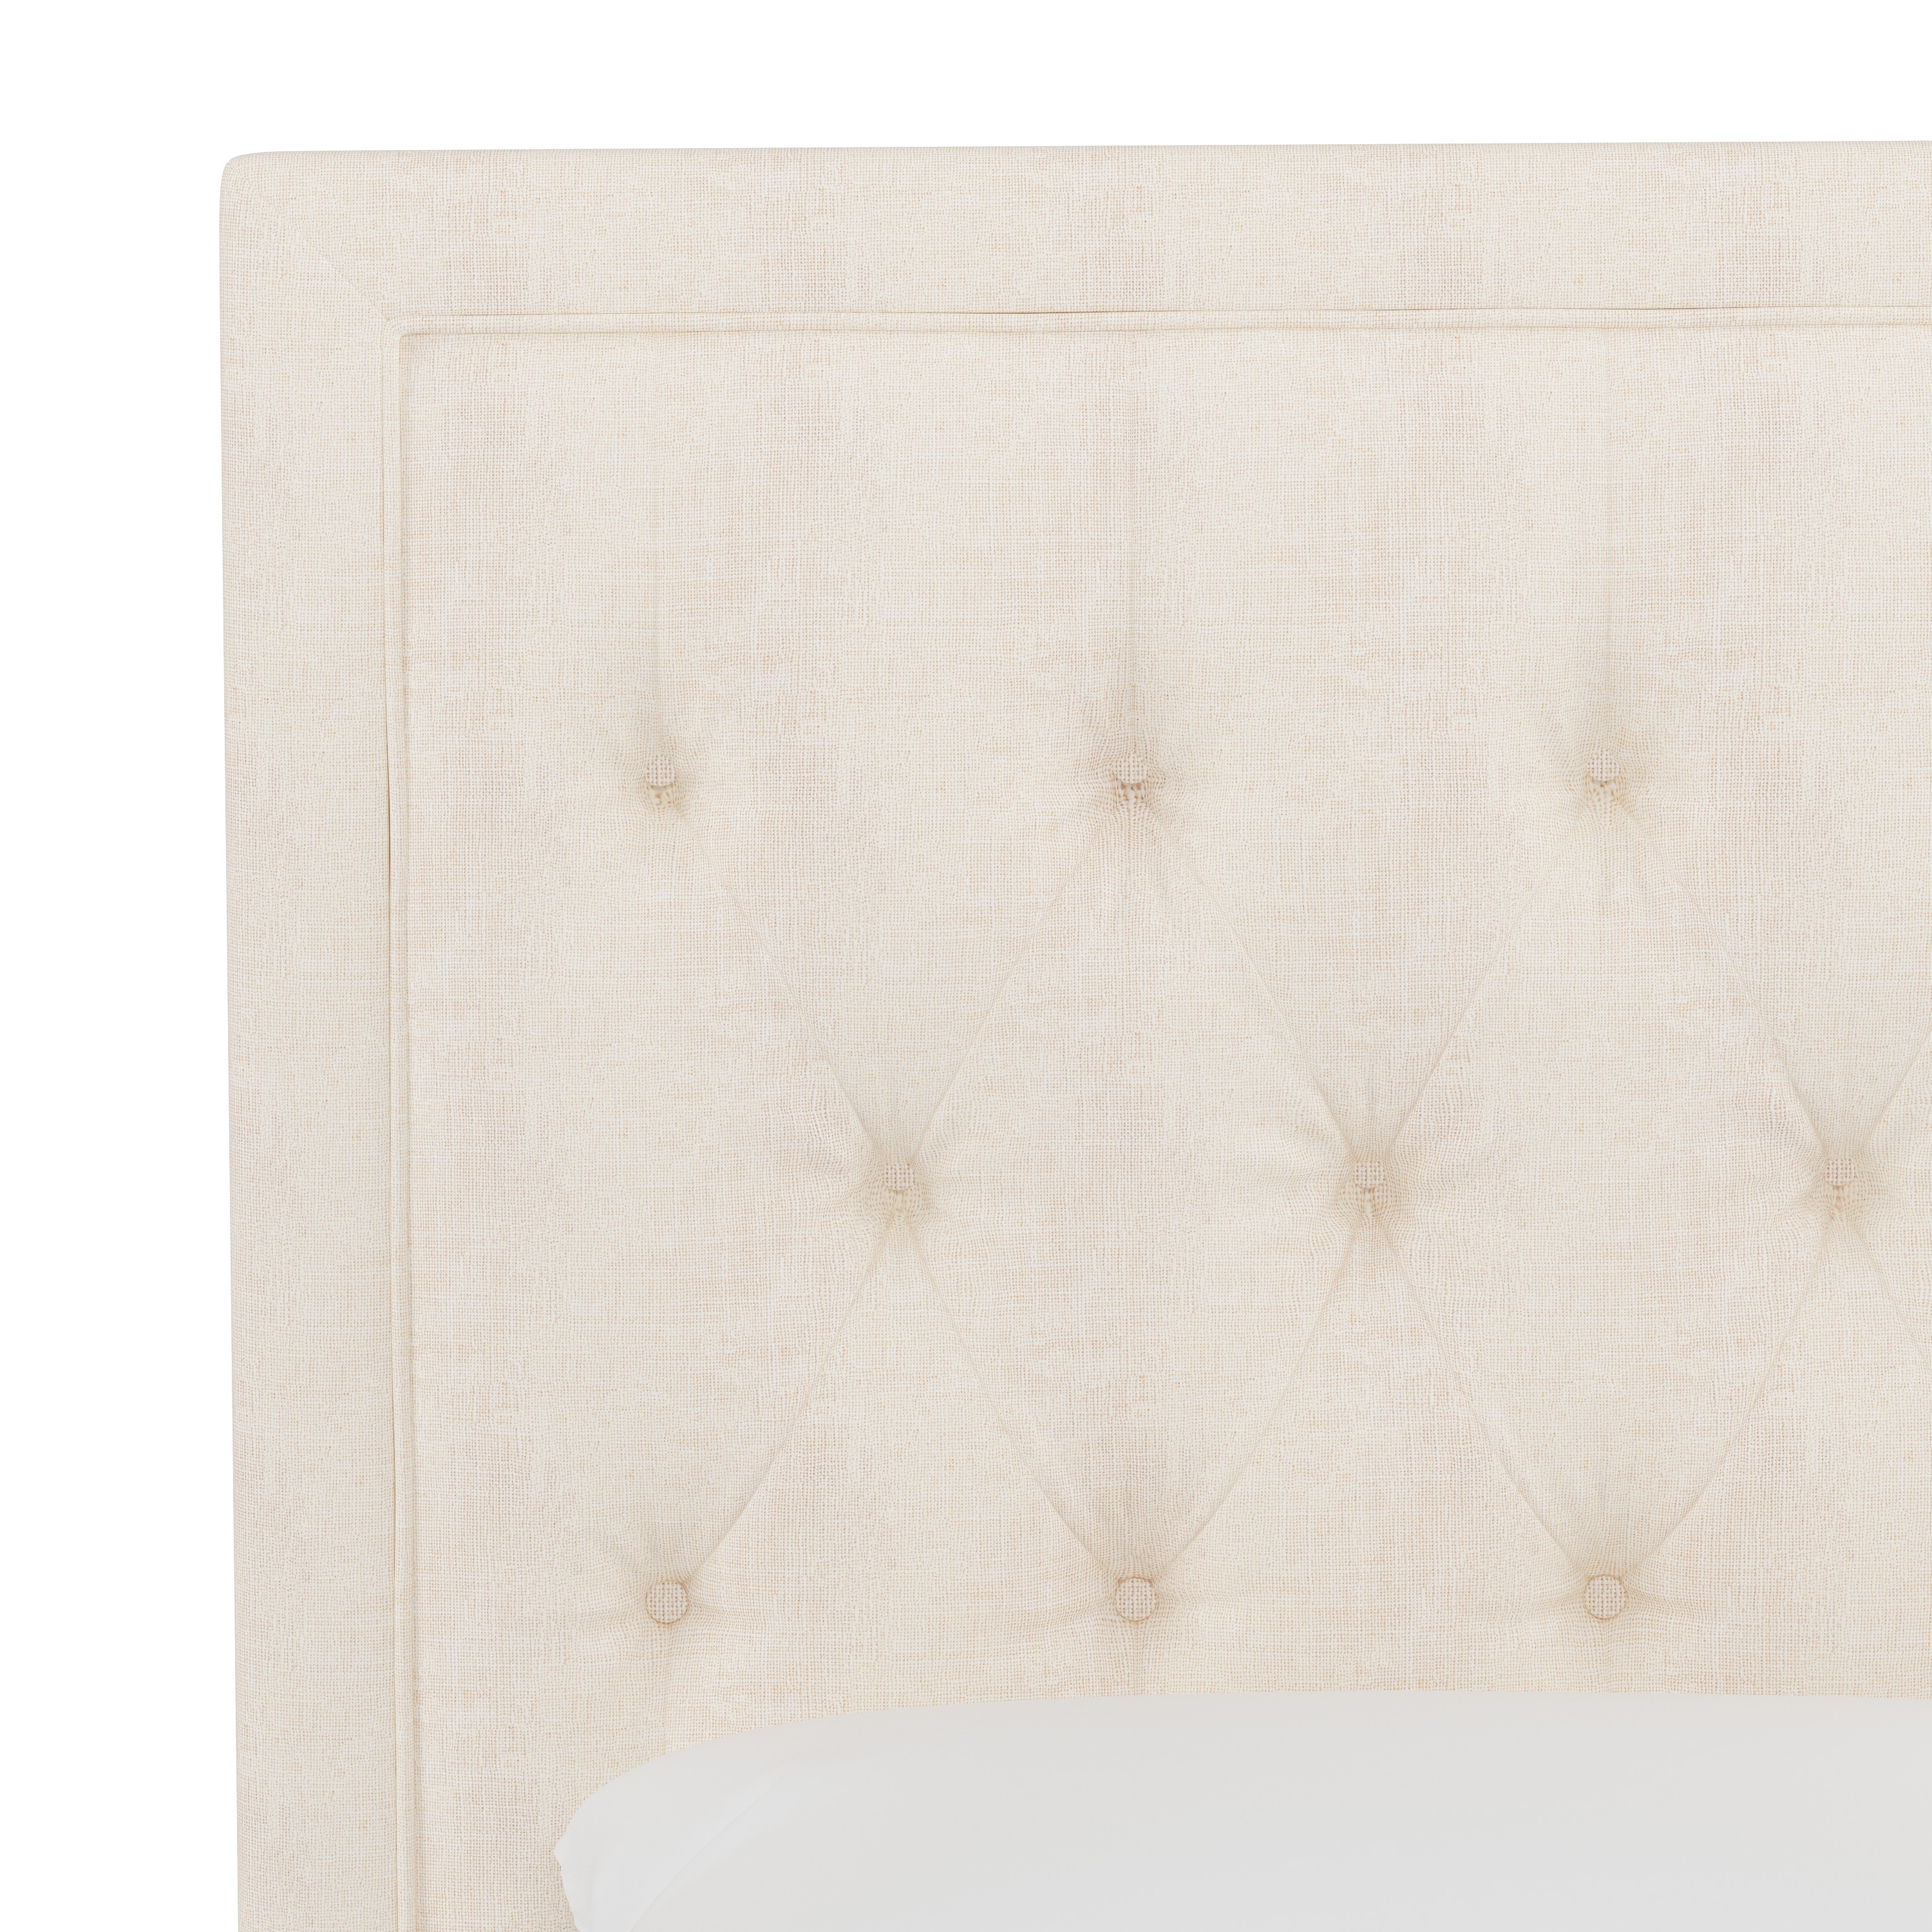 Lafayette Bed, Twin, White - Image 3